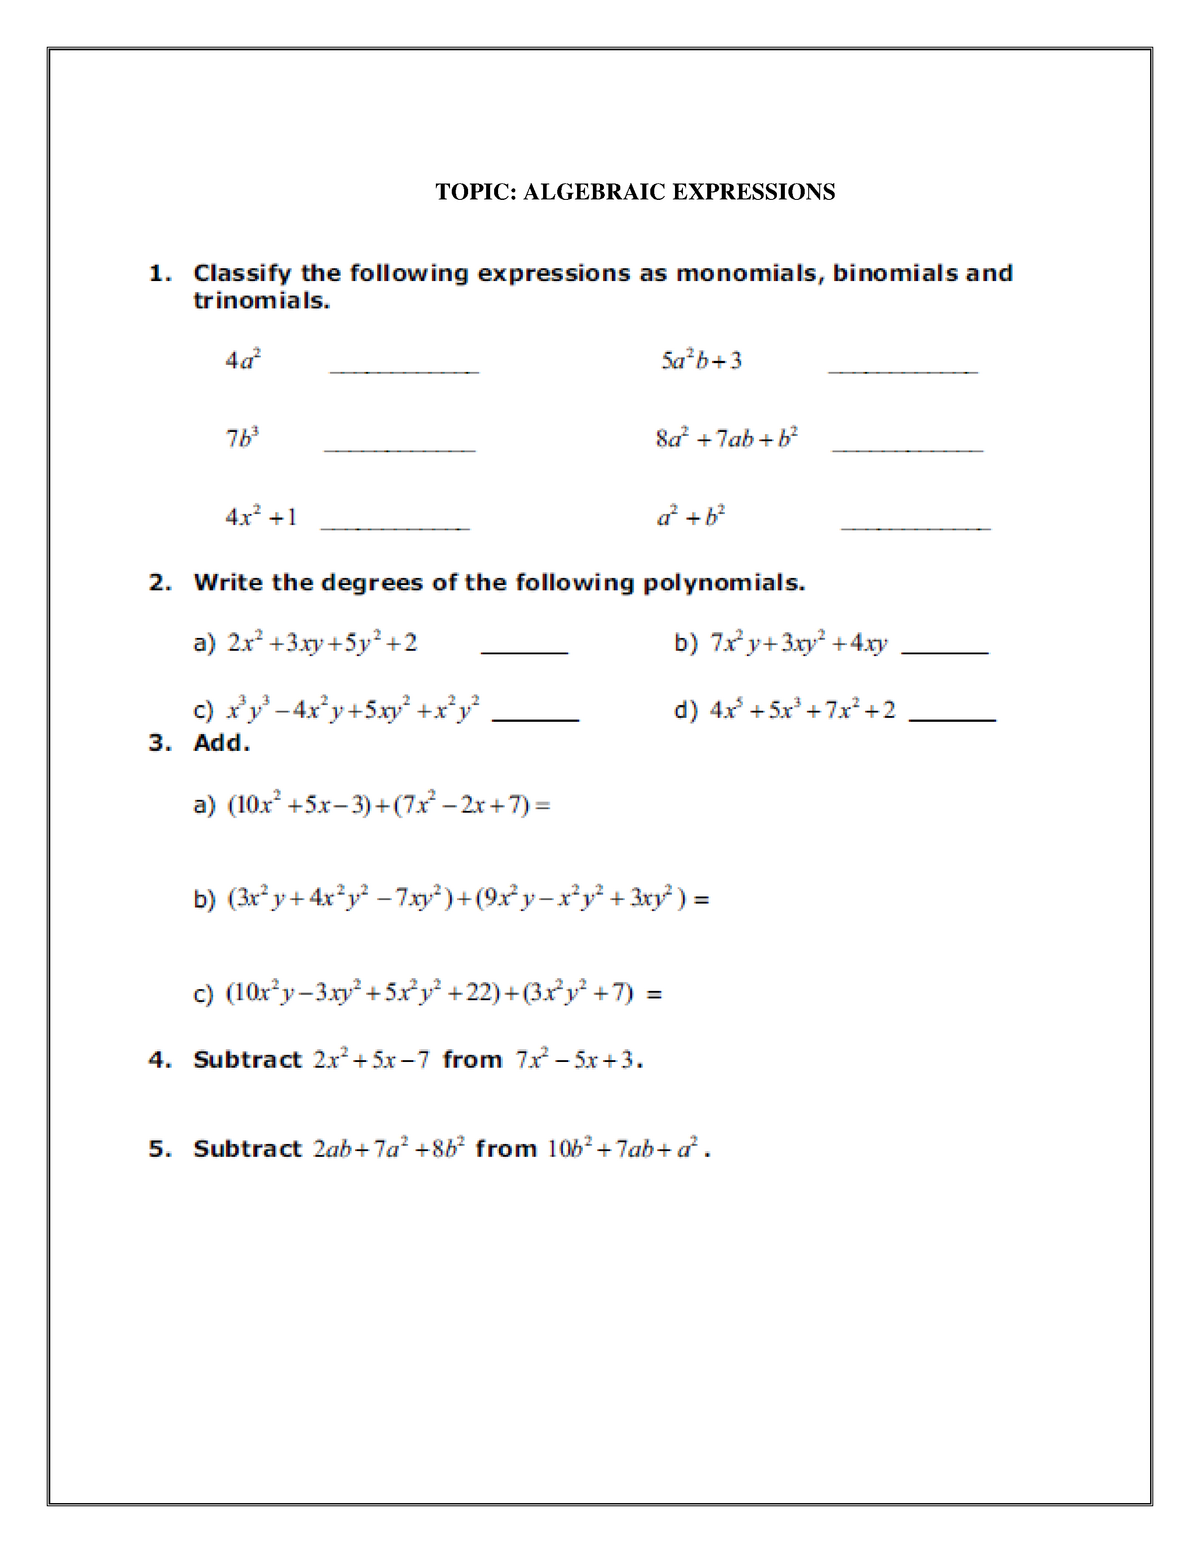 cbse-class-8-algebraic-expressions-and-identities-worksheet-topic